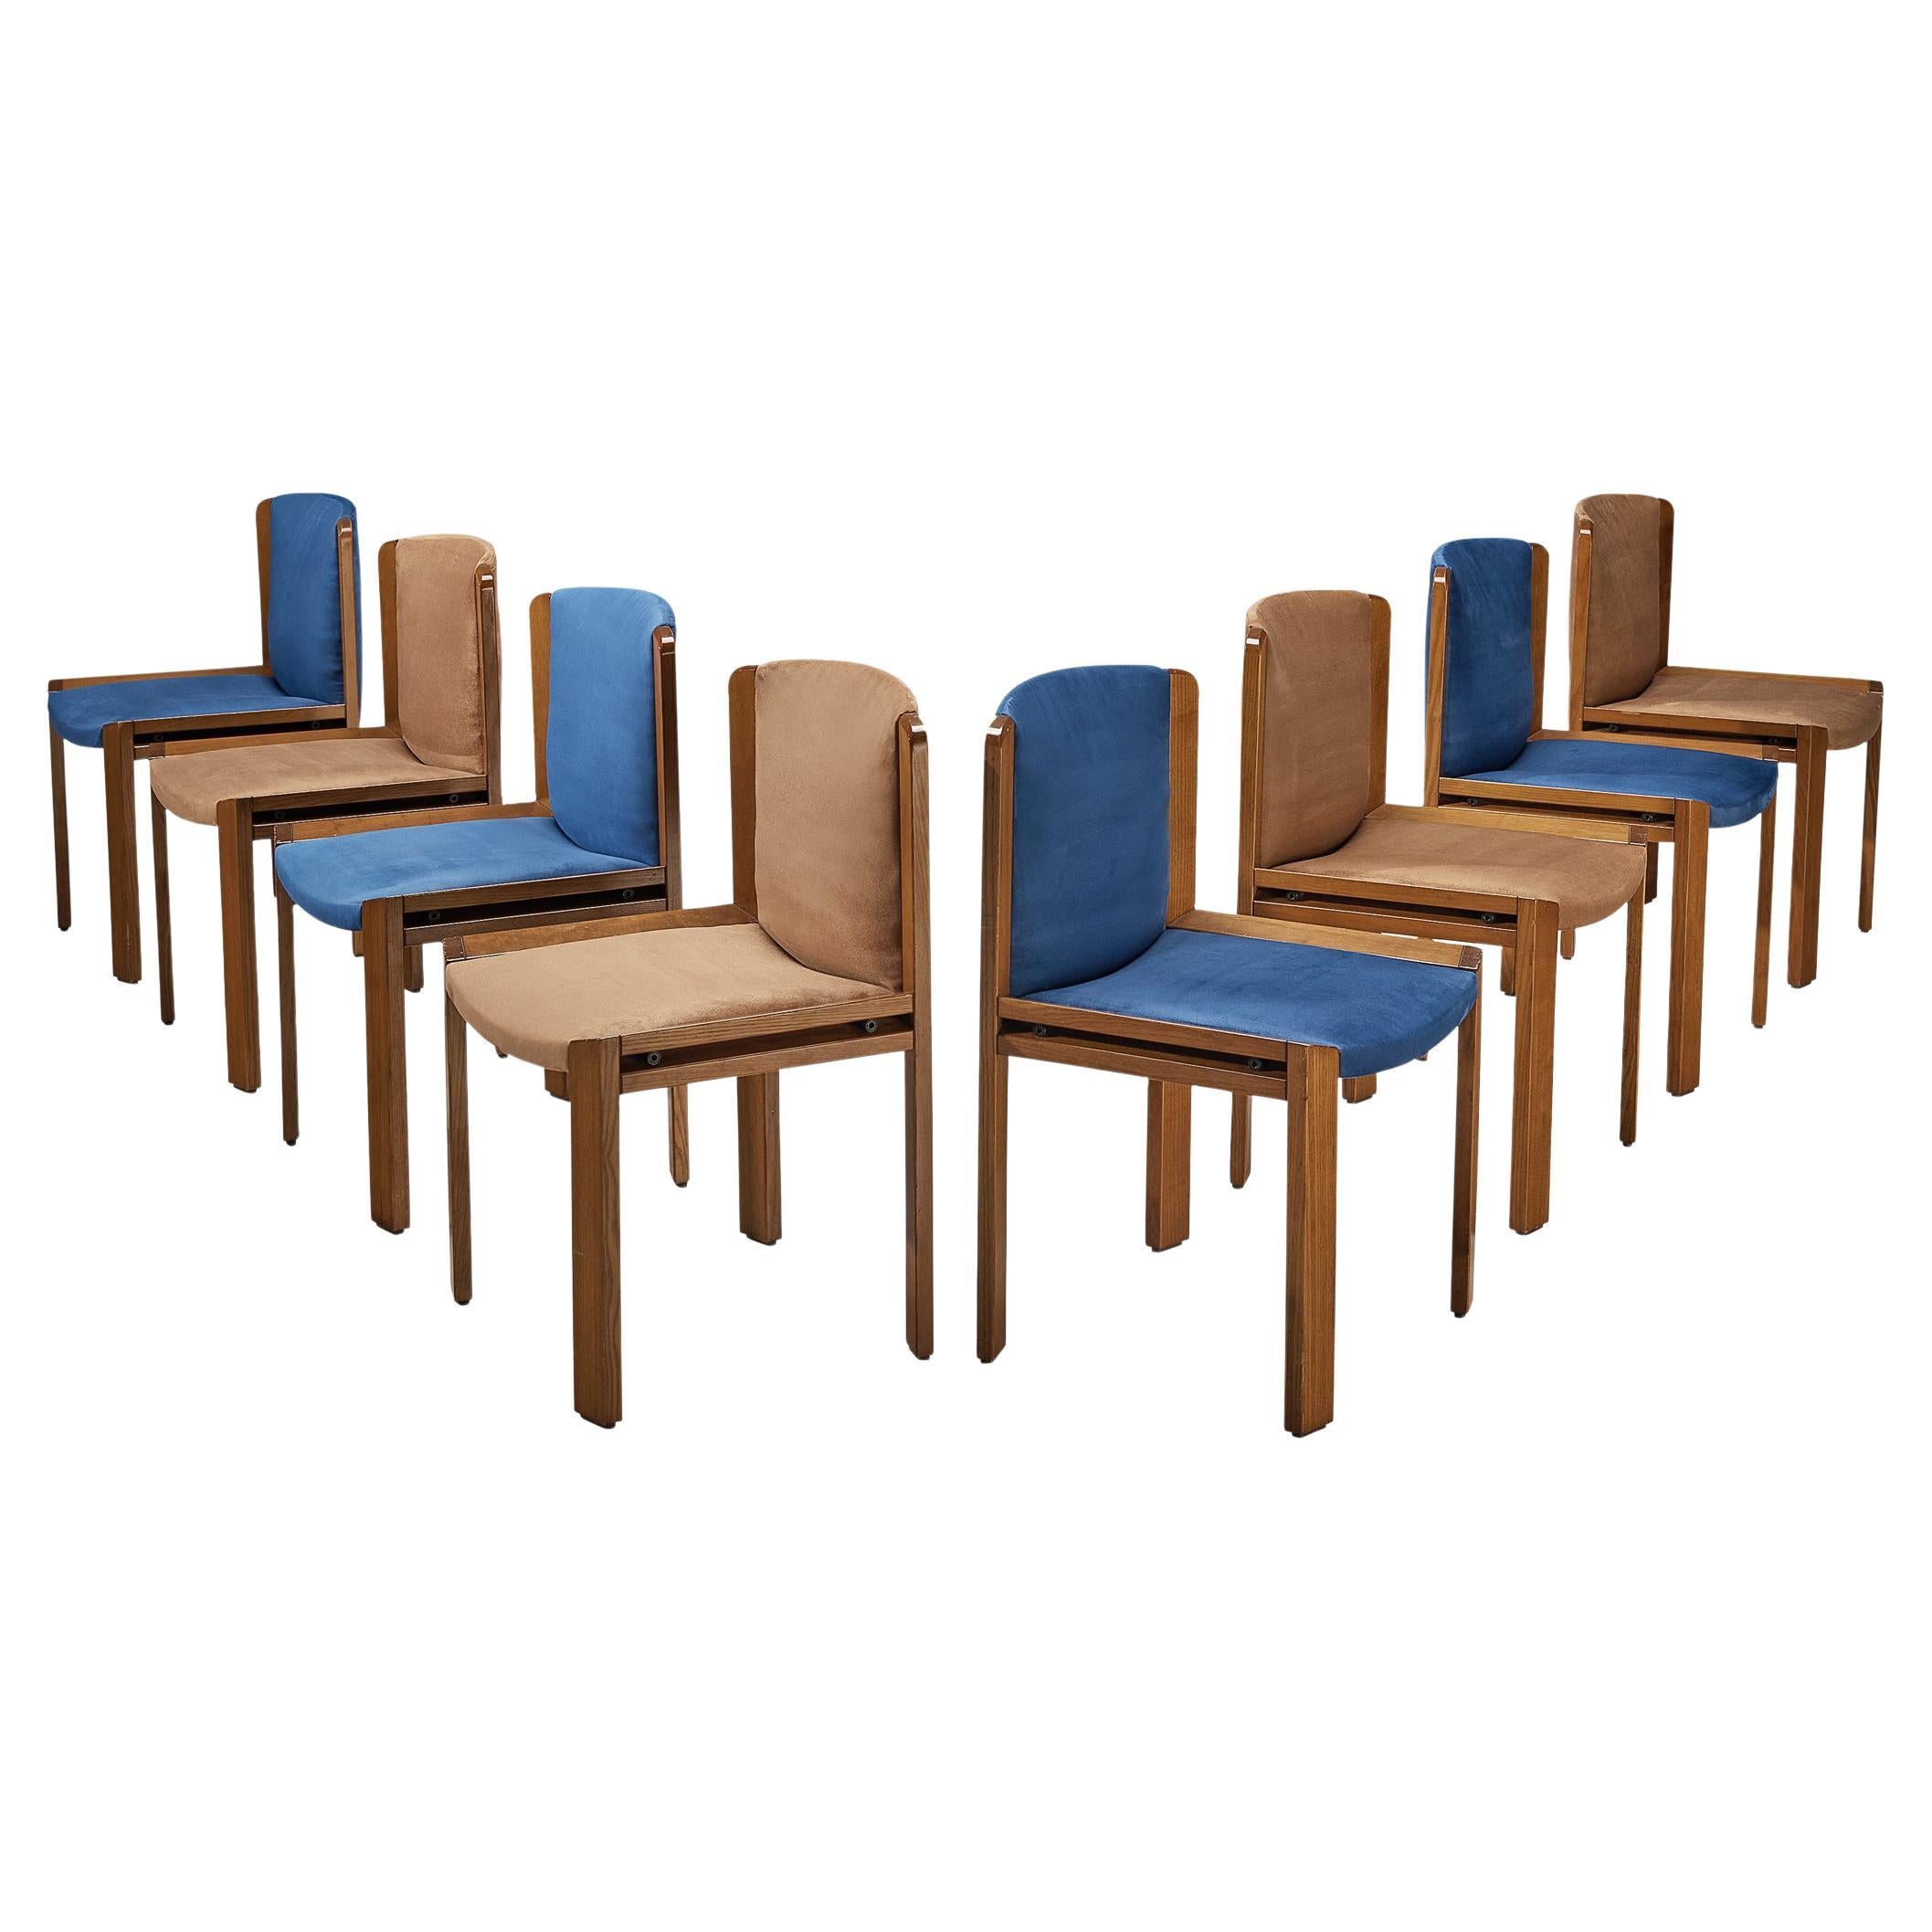 Joe Colombo for Pozzi Set of Eight Dining Chairs in Blue and Beige Upholstery